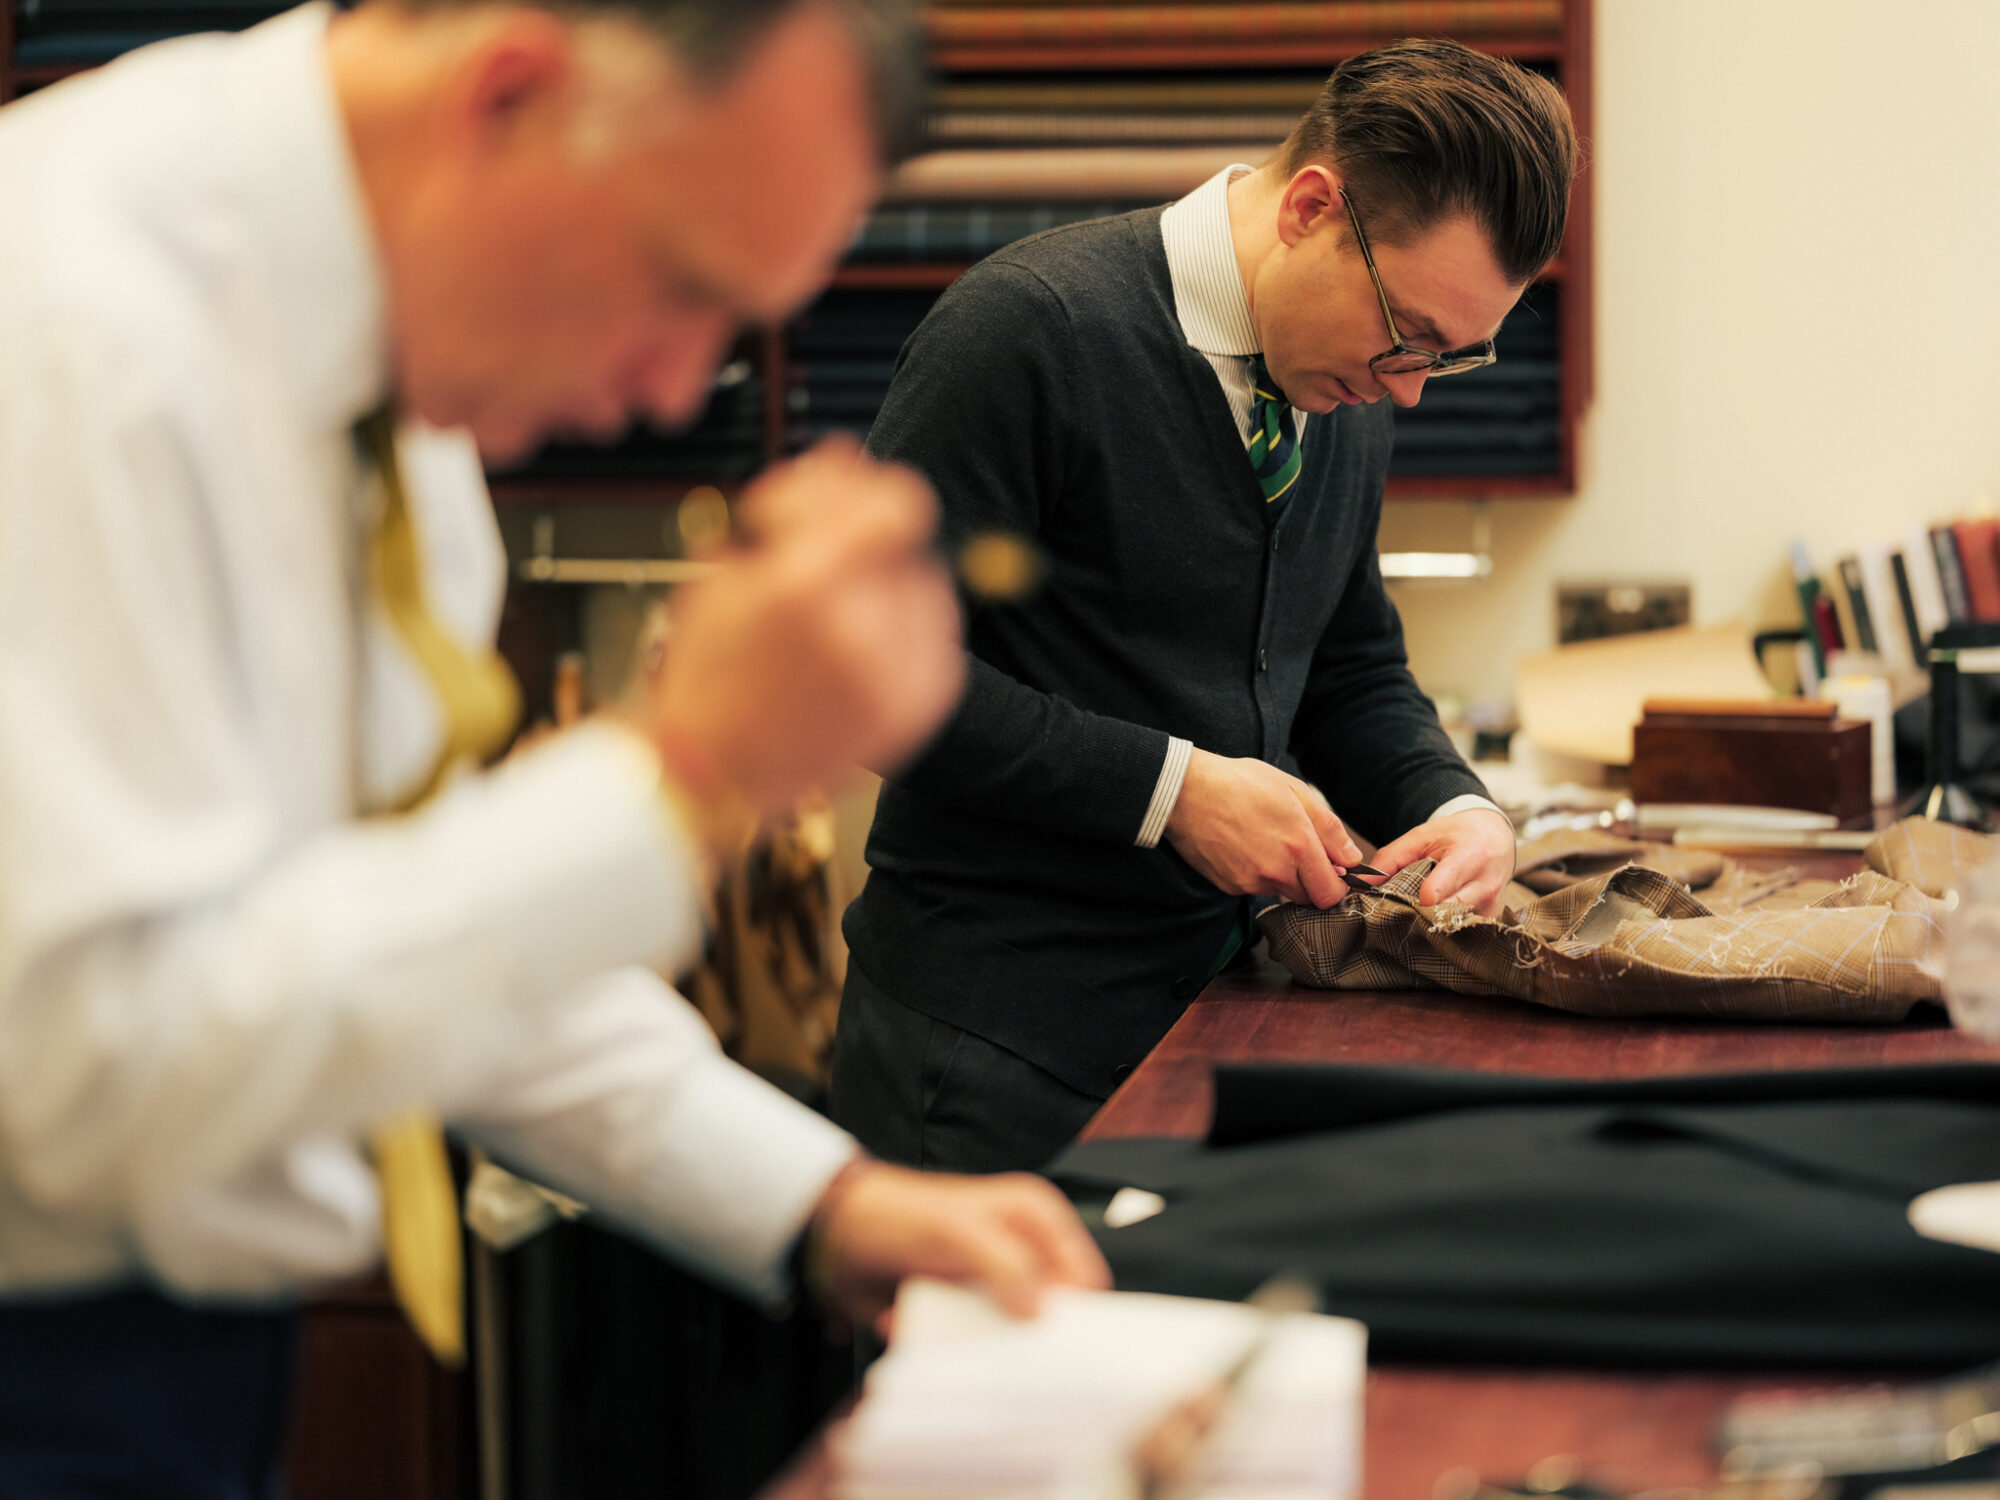 Things to do in the City of London - two tailors at work on suits